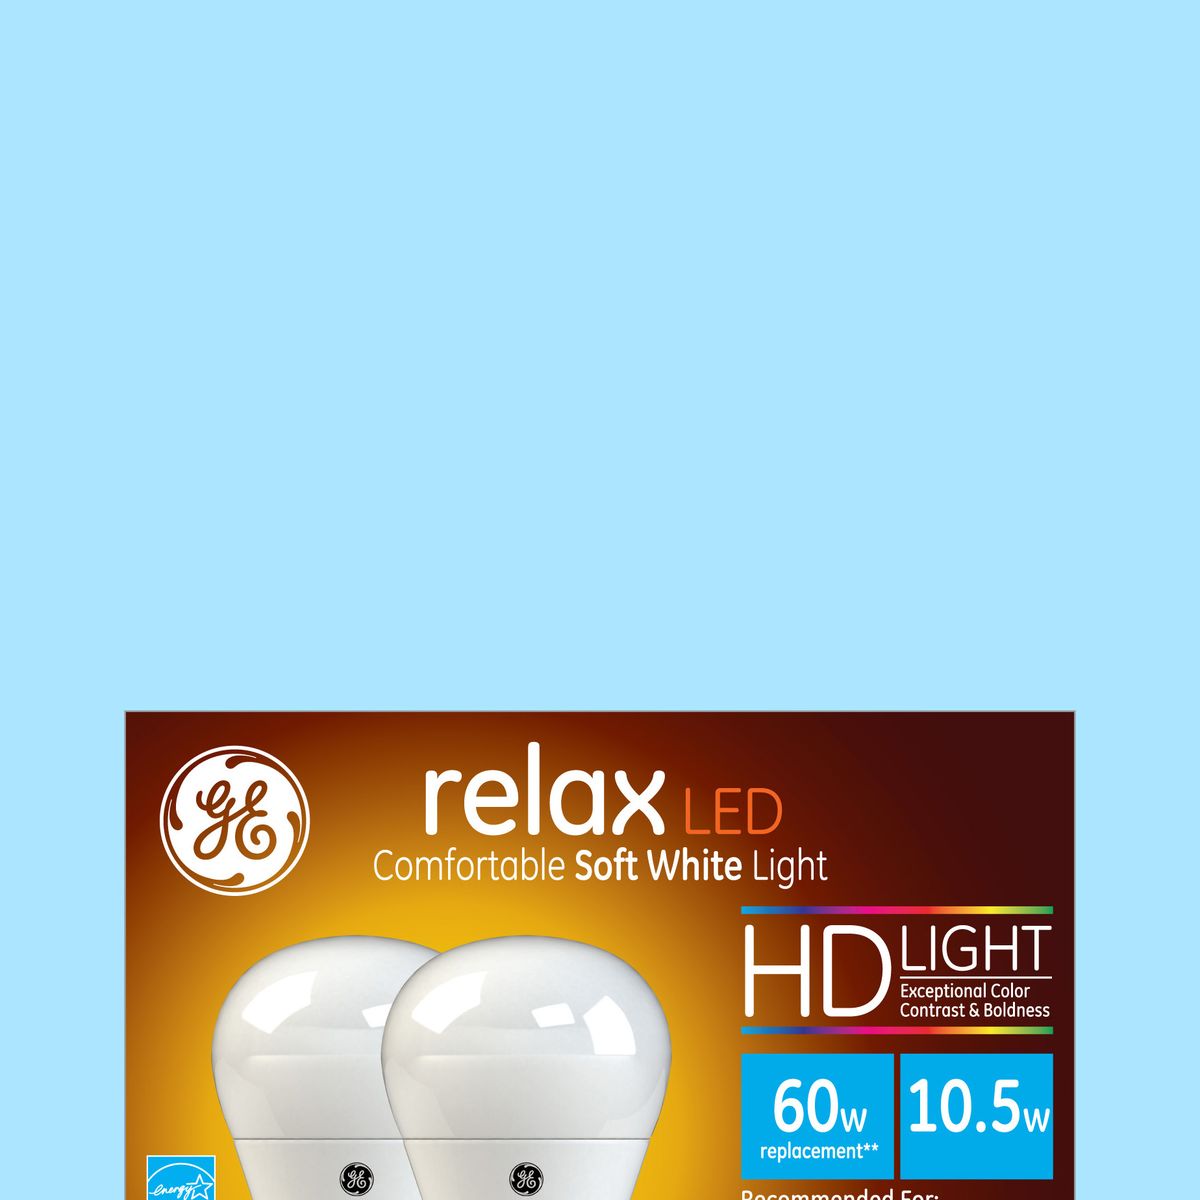 Citron Tradition vogn I'm Obsessed With These LED Light Bulbs - GE Relax LED Bulbs Review